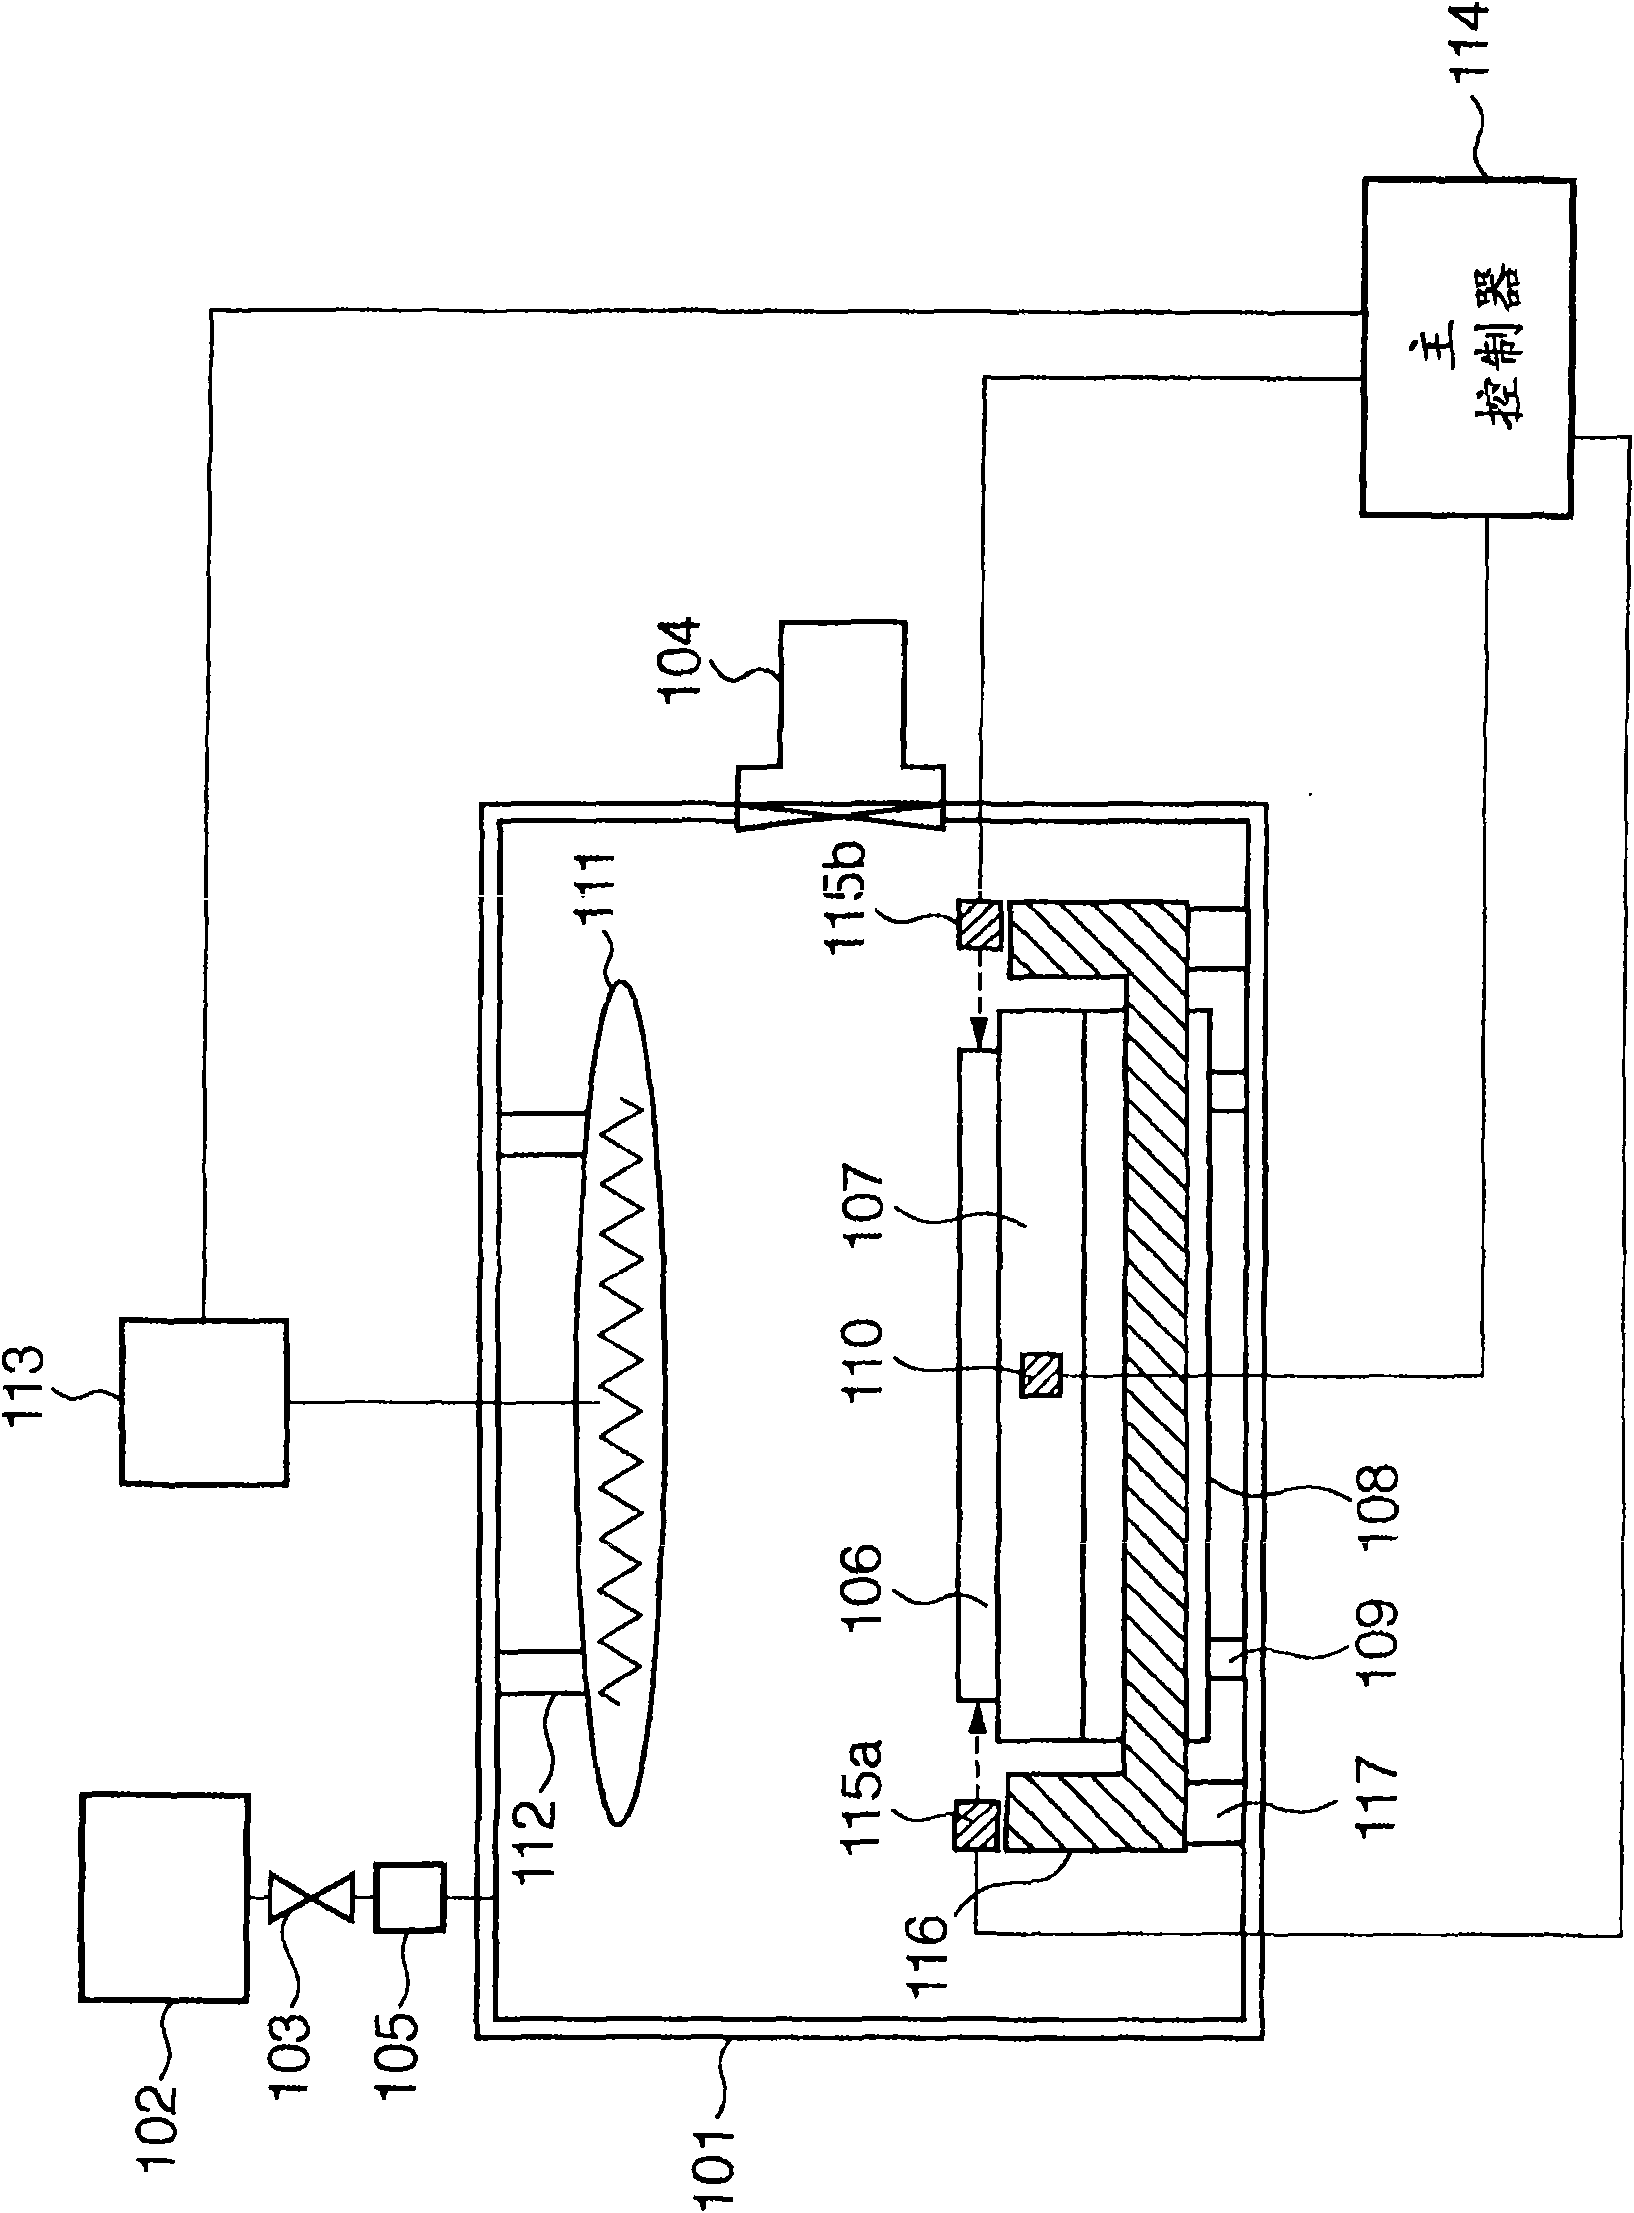 Substrate surface temperature measurement method, substrate processing apparatus using the same, and semiconductor device manufacturing method